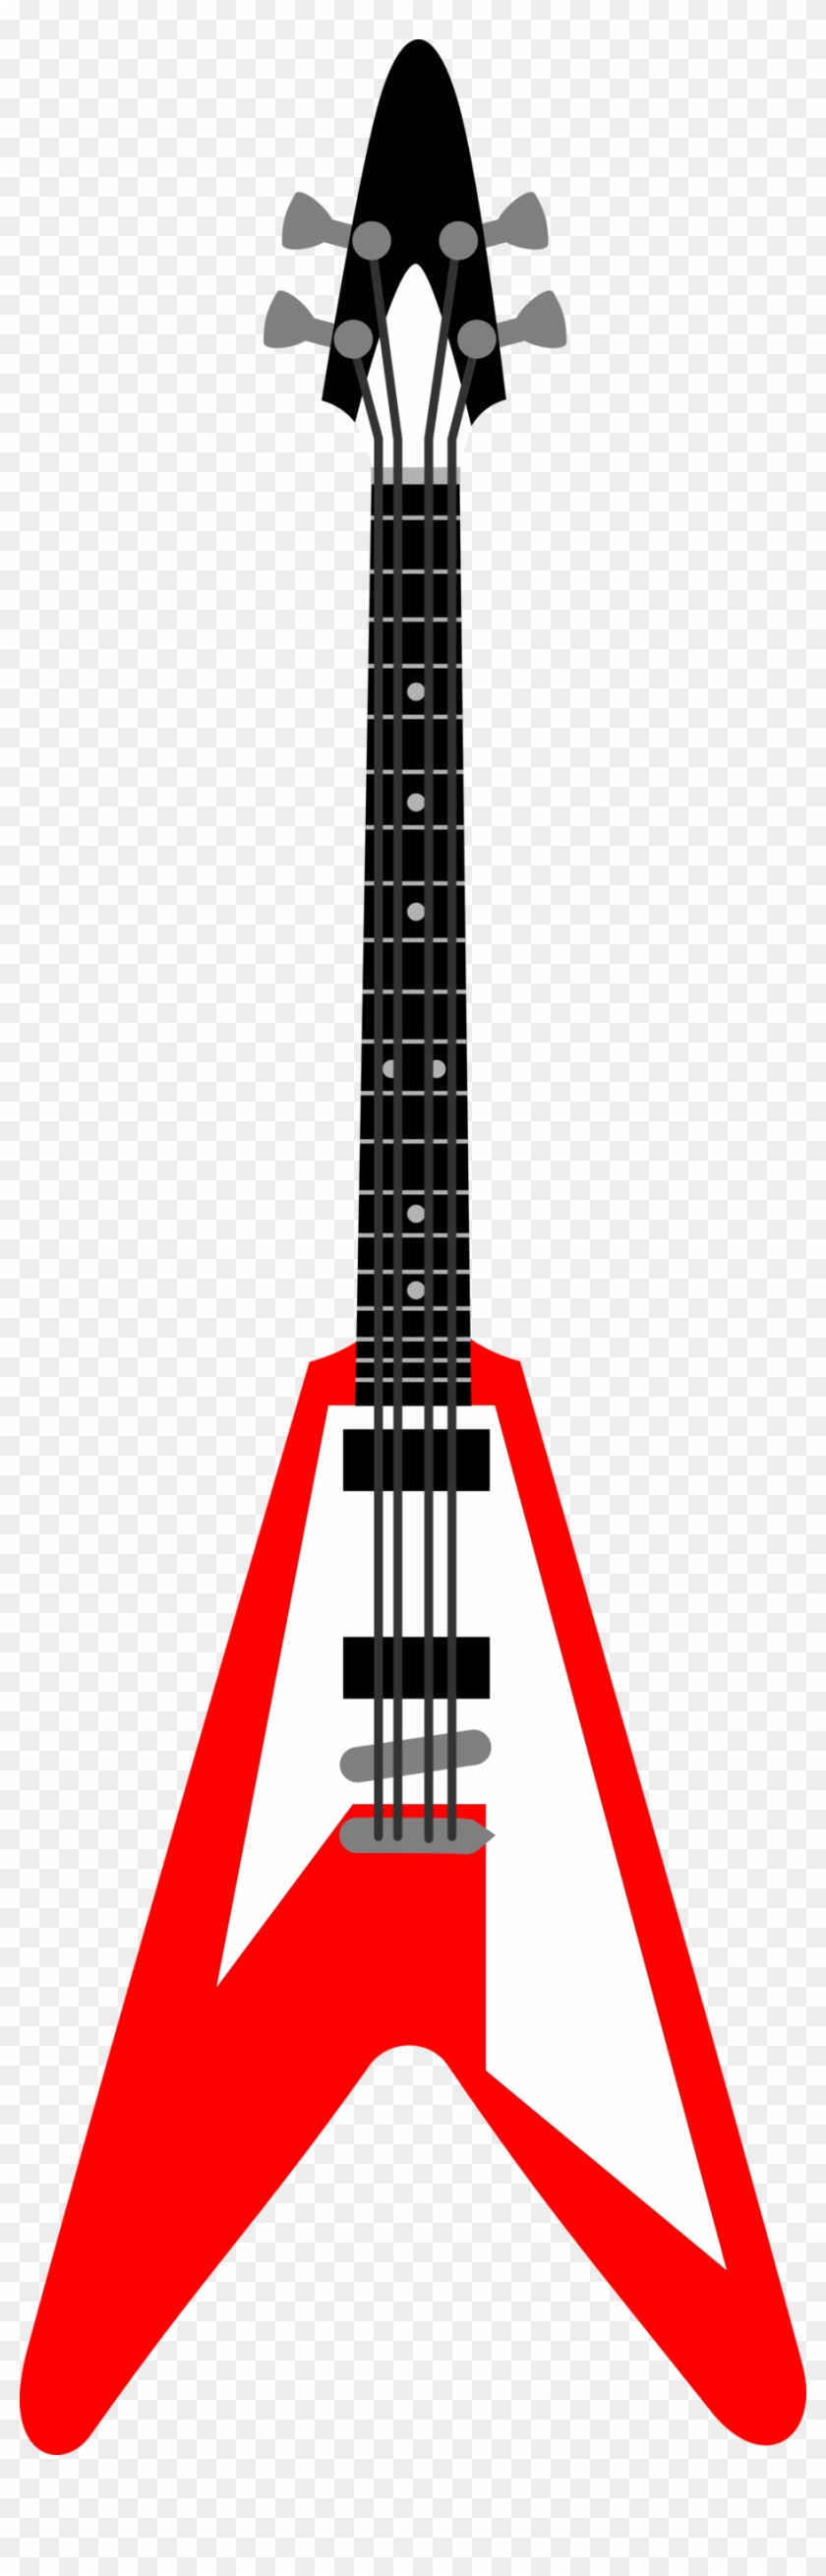 Cartoon Electric Guitar - Electric Guitar Cartoon Png #417213